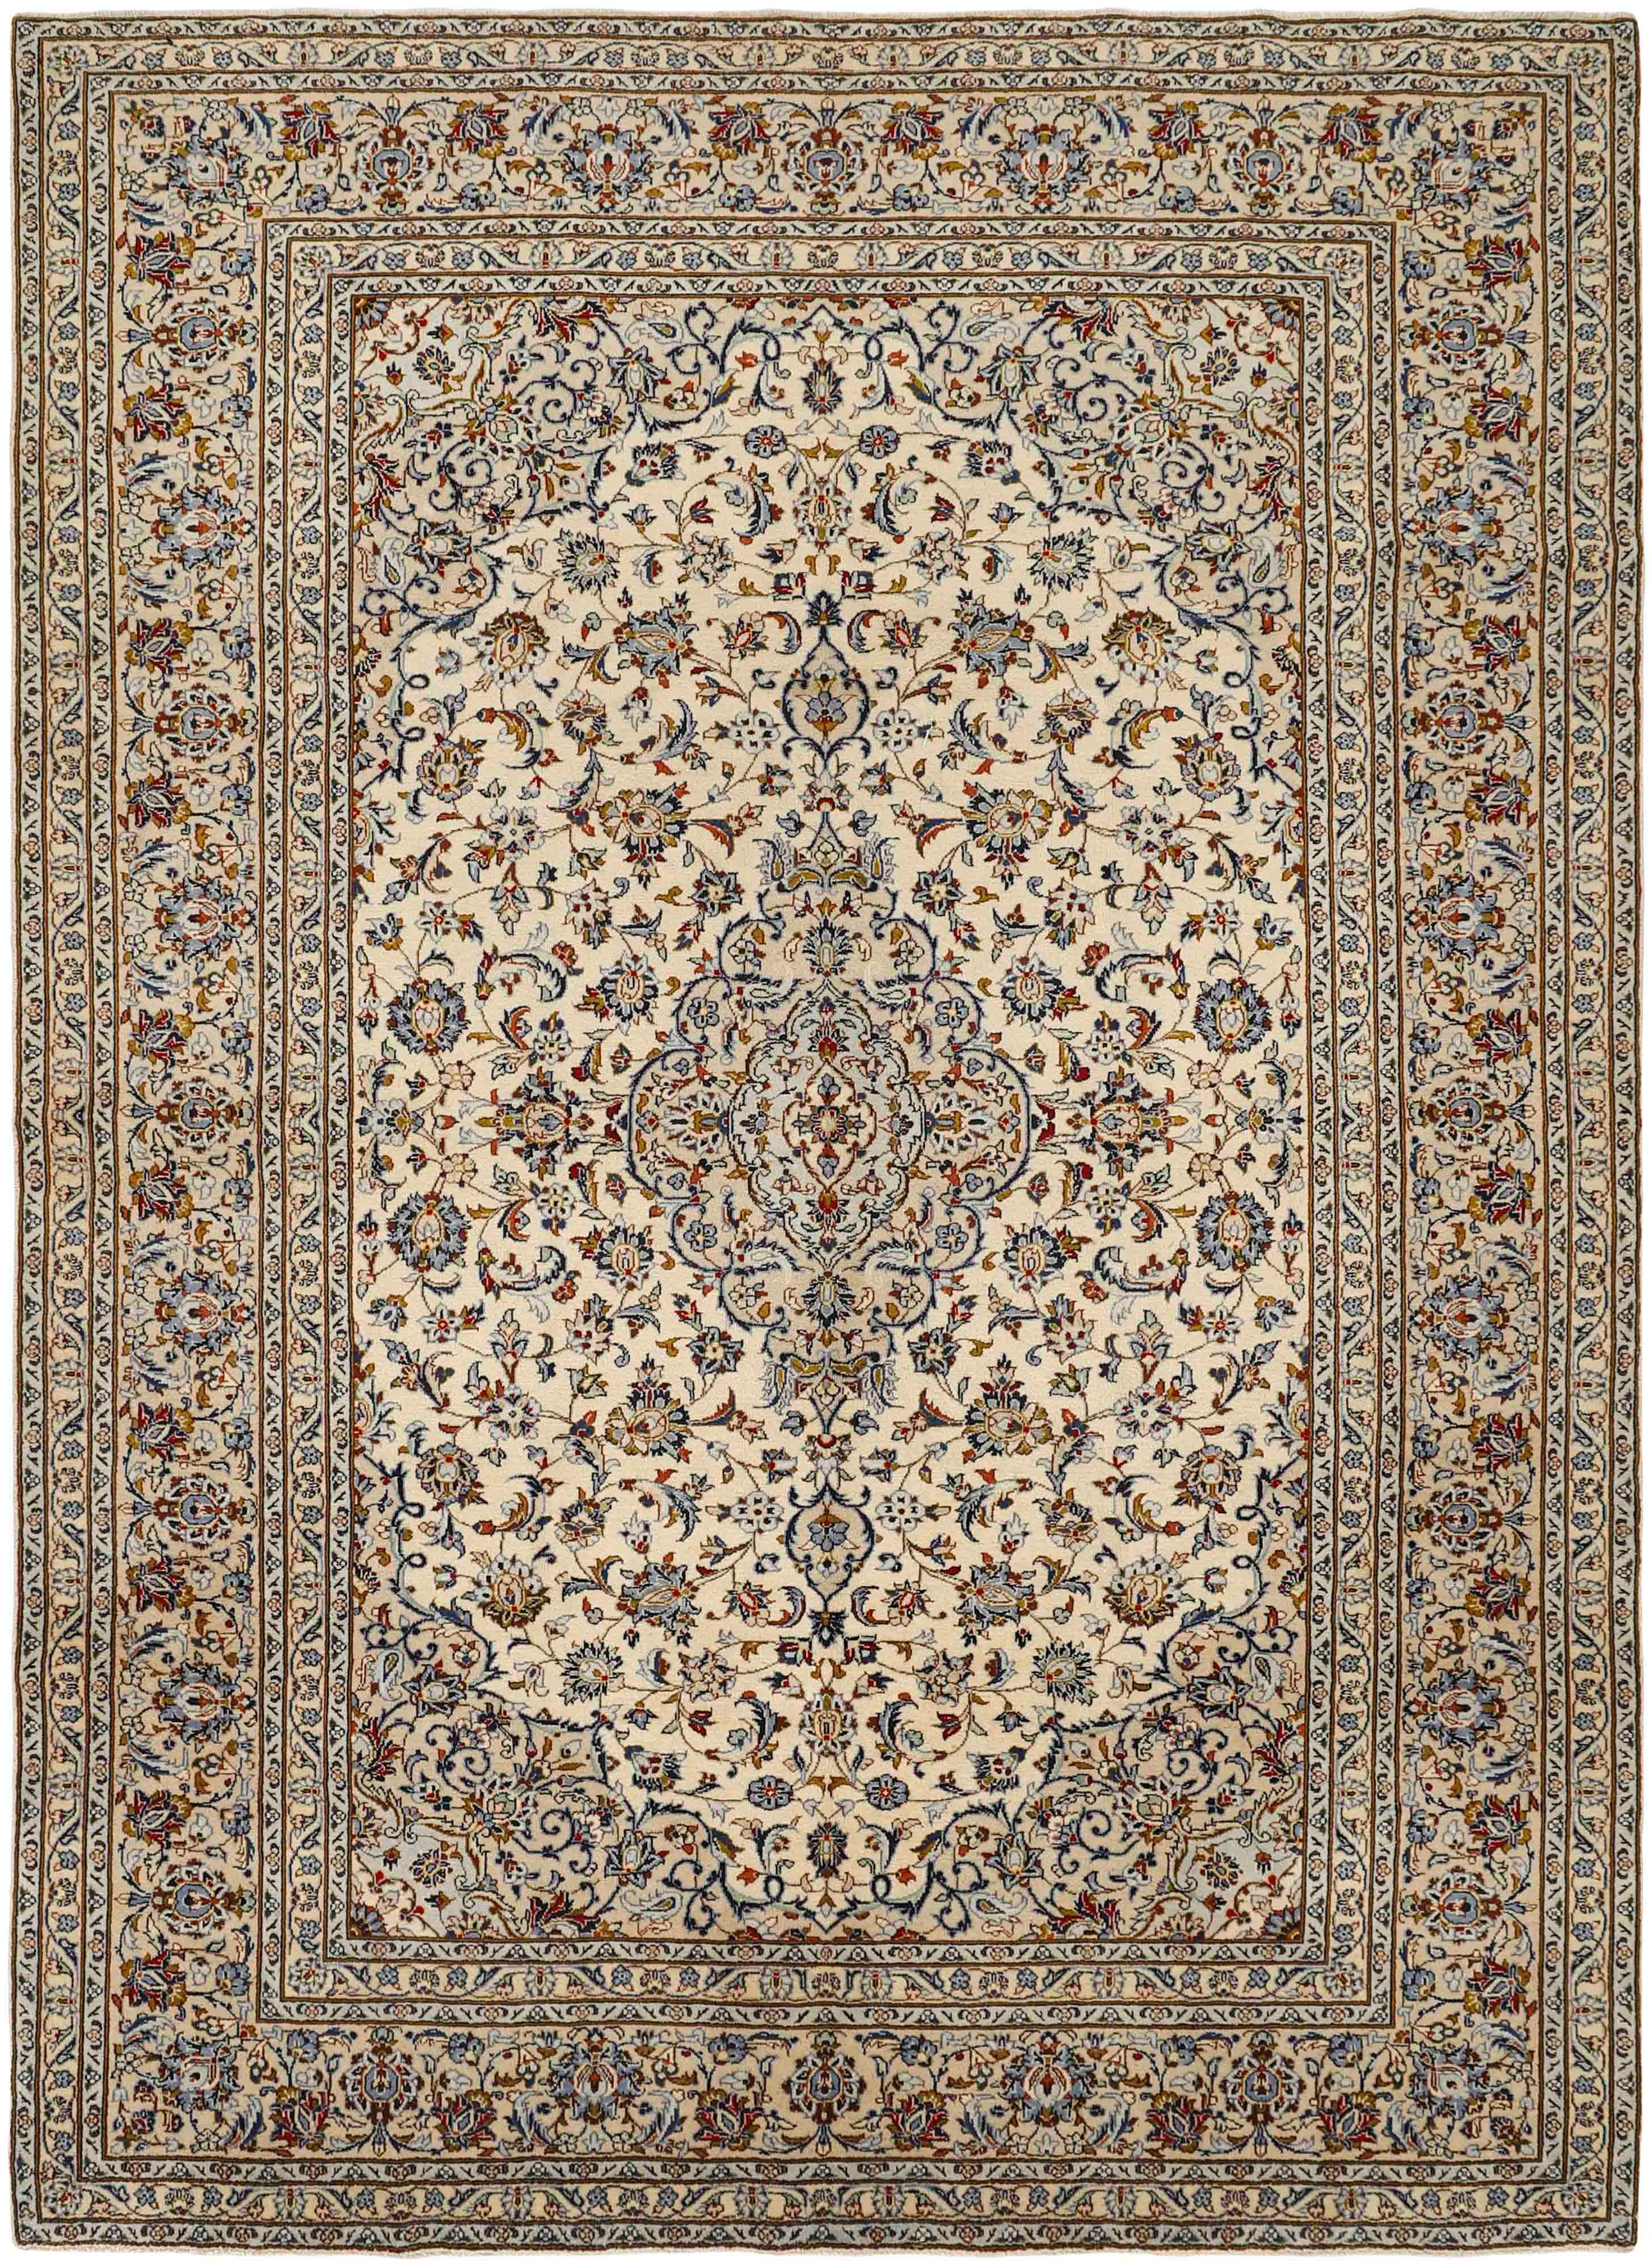 Authentic persian rug with traditional floral design in red, blue, beige and brown